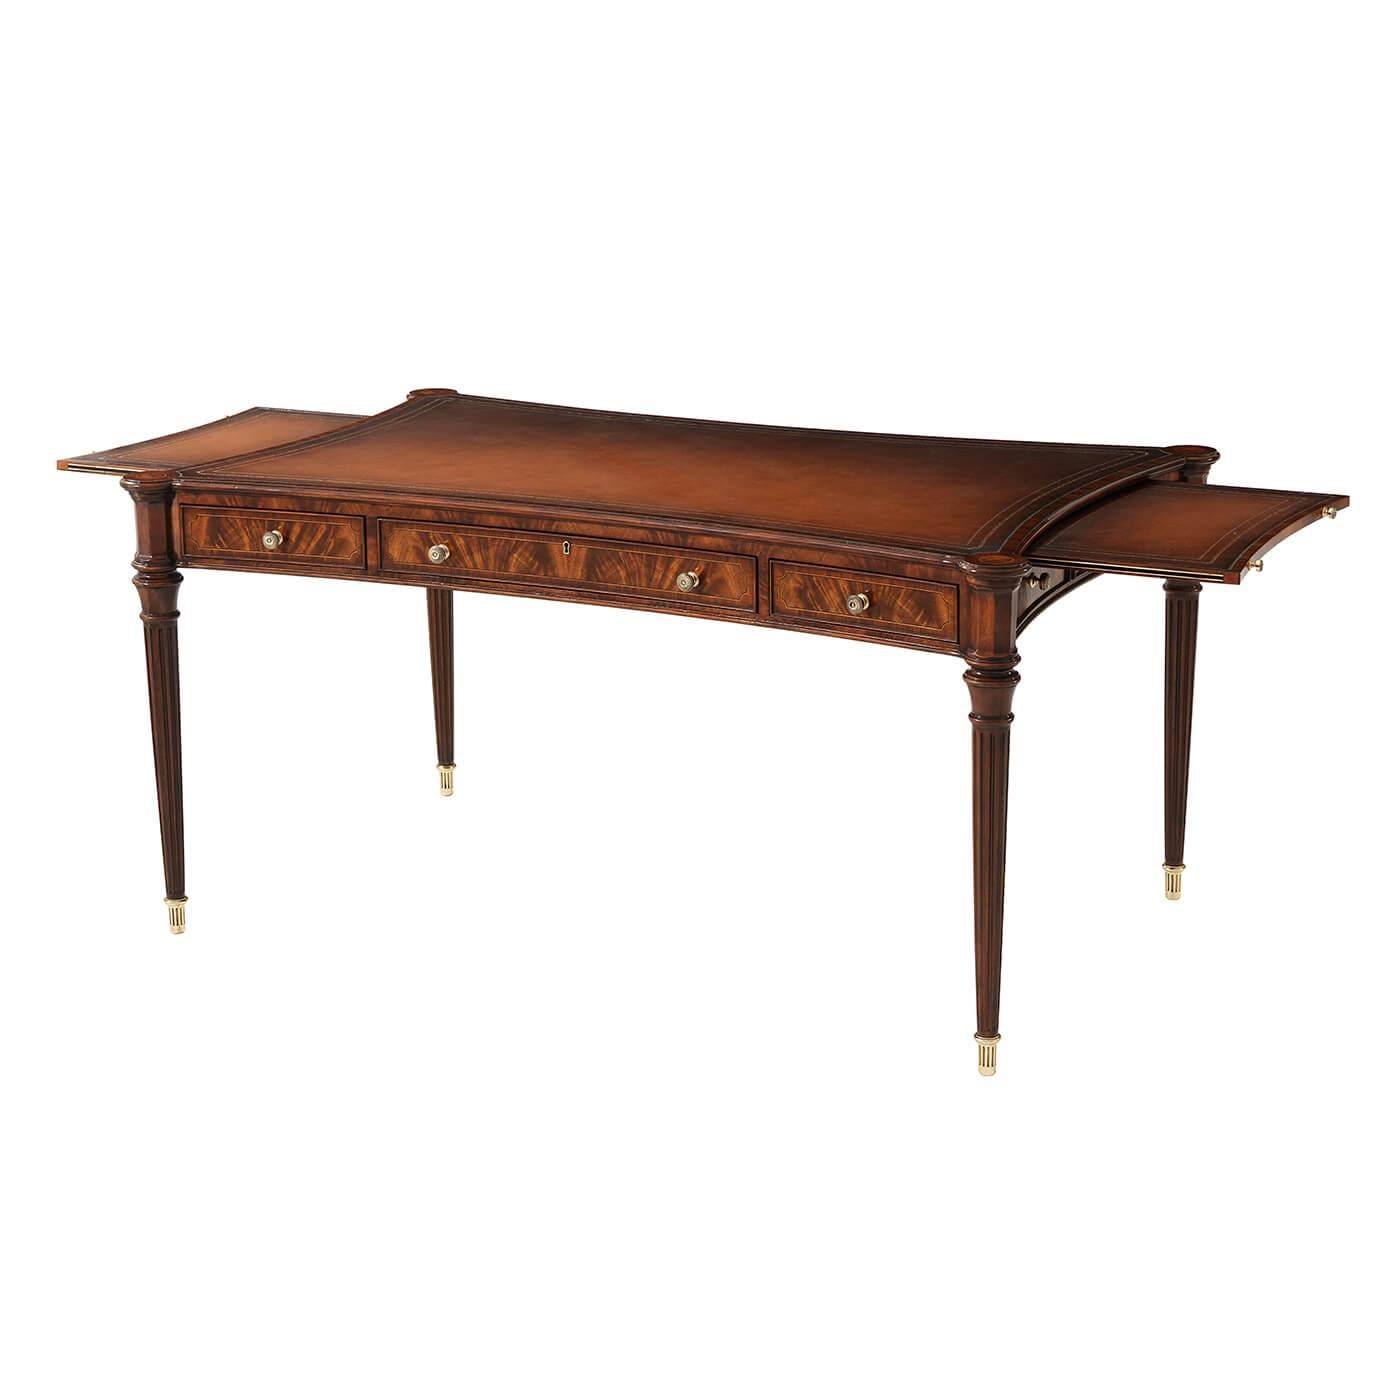 A Regency style finely Morado crossbanded, Sycamore line strung flame veneered and carved mahogany writing table, the concave-sided top with burnished leather and gold-tooled insert to the top and end slides, with Morado crossbanded frieze drawers,